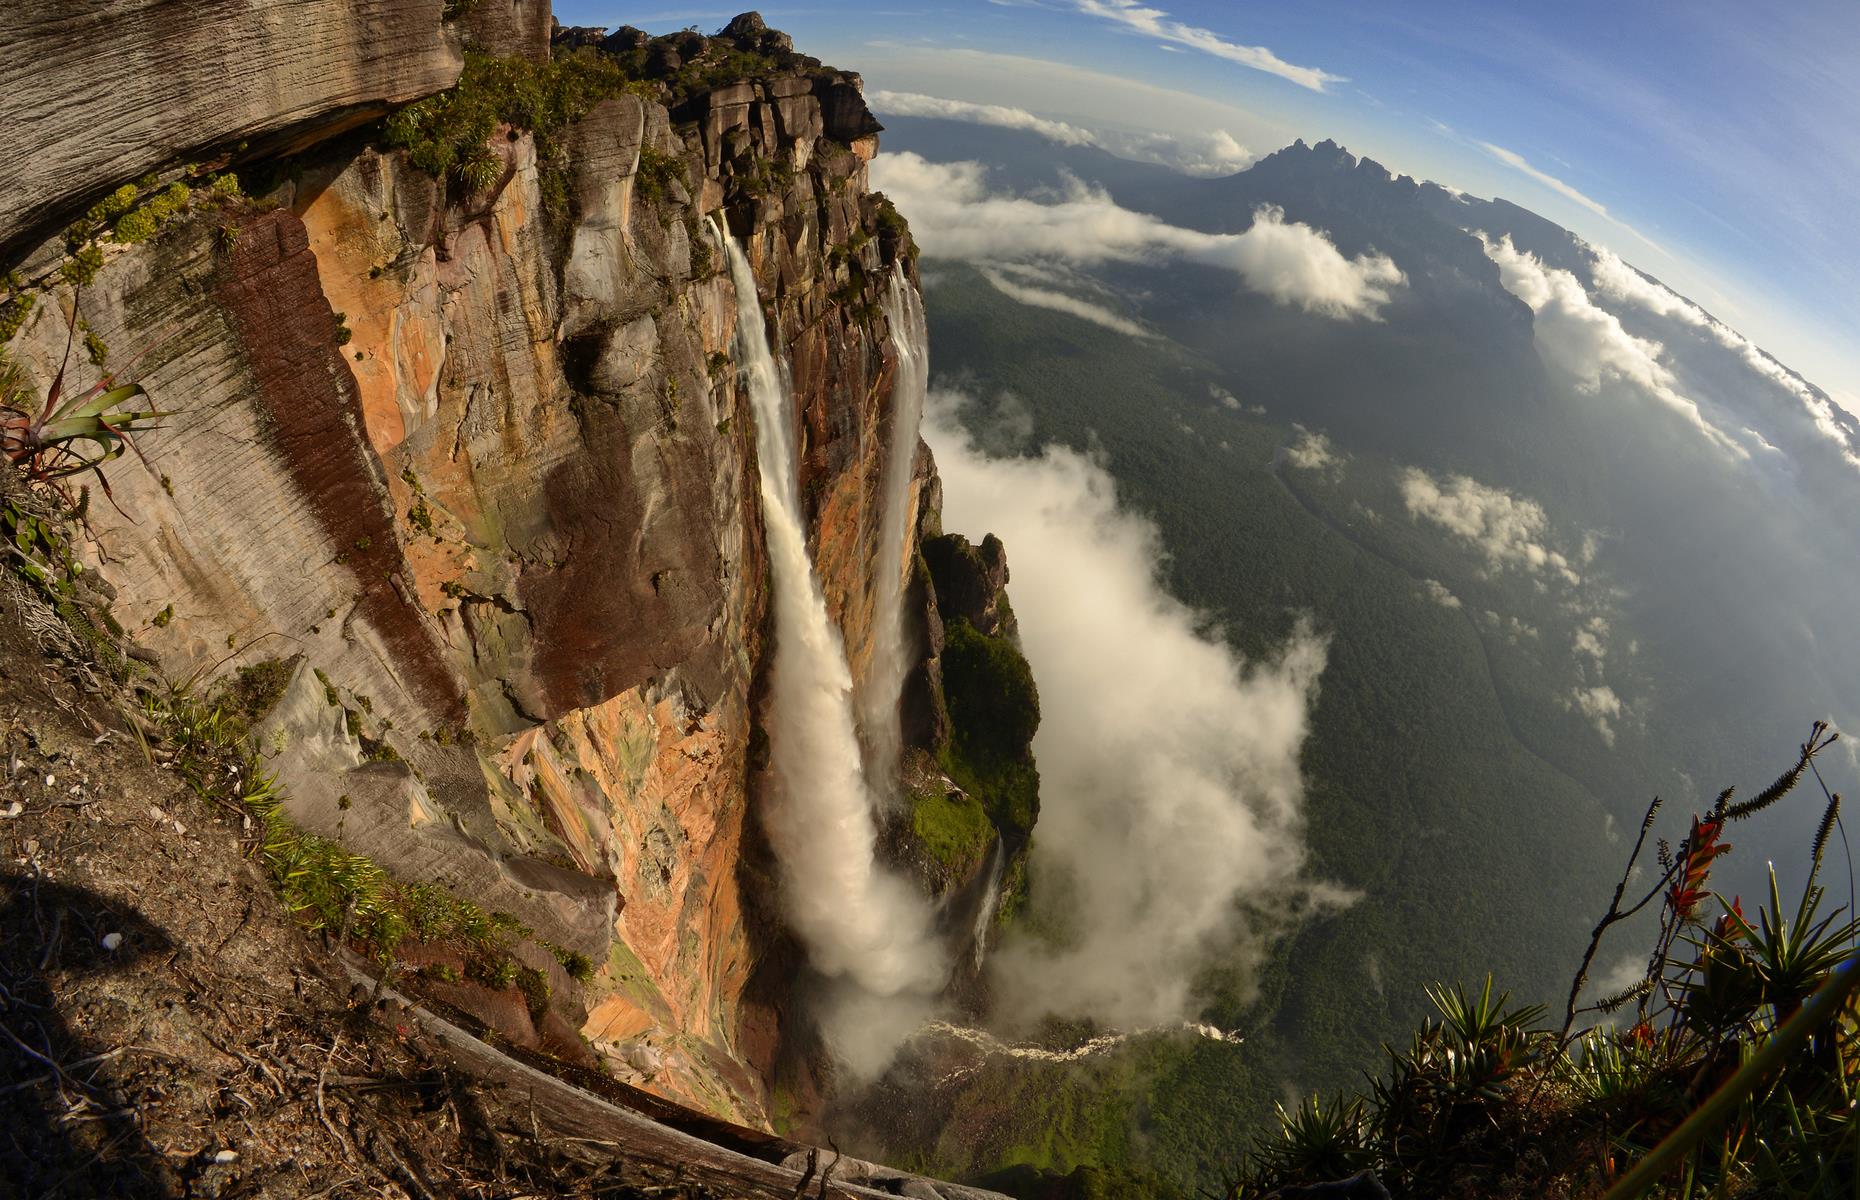 <p>Plummeting 3,212 feet (979m) over the edge of the Auyán-tepui mountain and into the Churún River, the awe-inspiring Angel Falls is the world’s tallest waterfall. Equally dramatic is its remote location in southeastern Venezuela's Canaima National Park, with its striking flat-topped mountains and mist-shrouded forests. There are only two ways to see the falls – from above on a scenic flight in a light aircraft or on an arduous journey by boat and on foot through the dense jungle.</p>